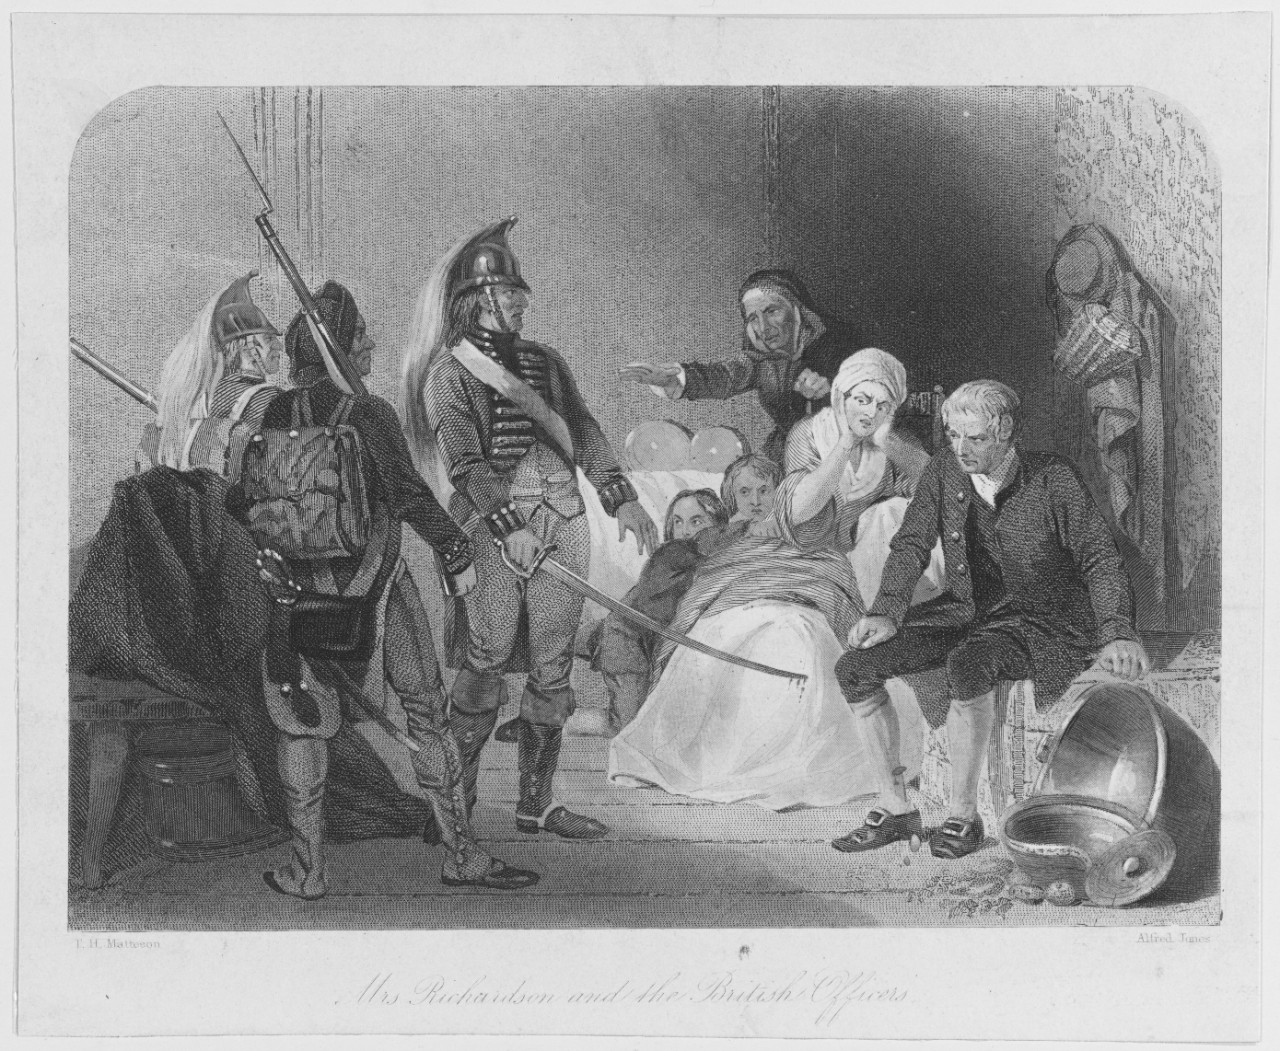 Engraving of Mrs. Richardson and the British Officers, during the Revolutionary War